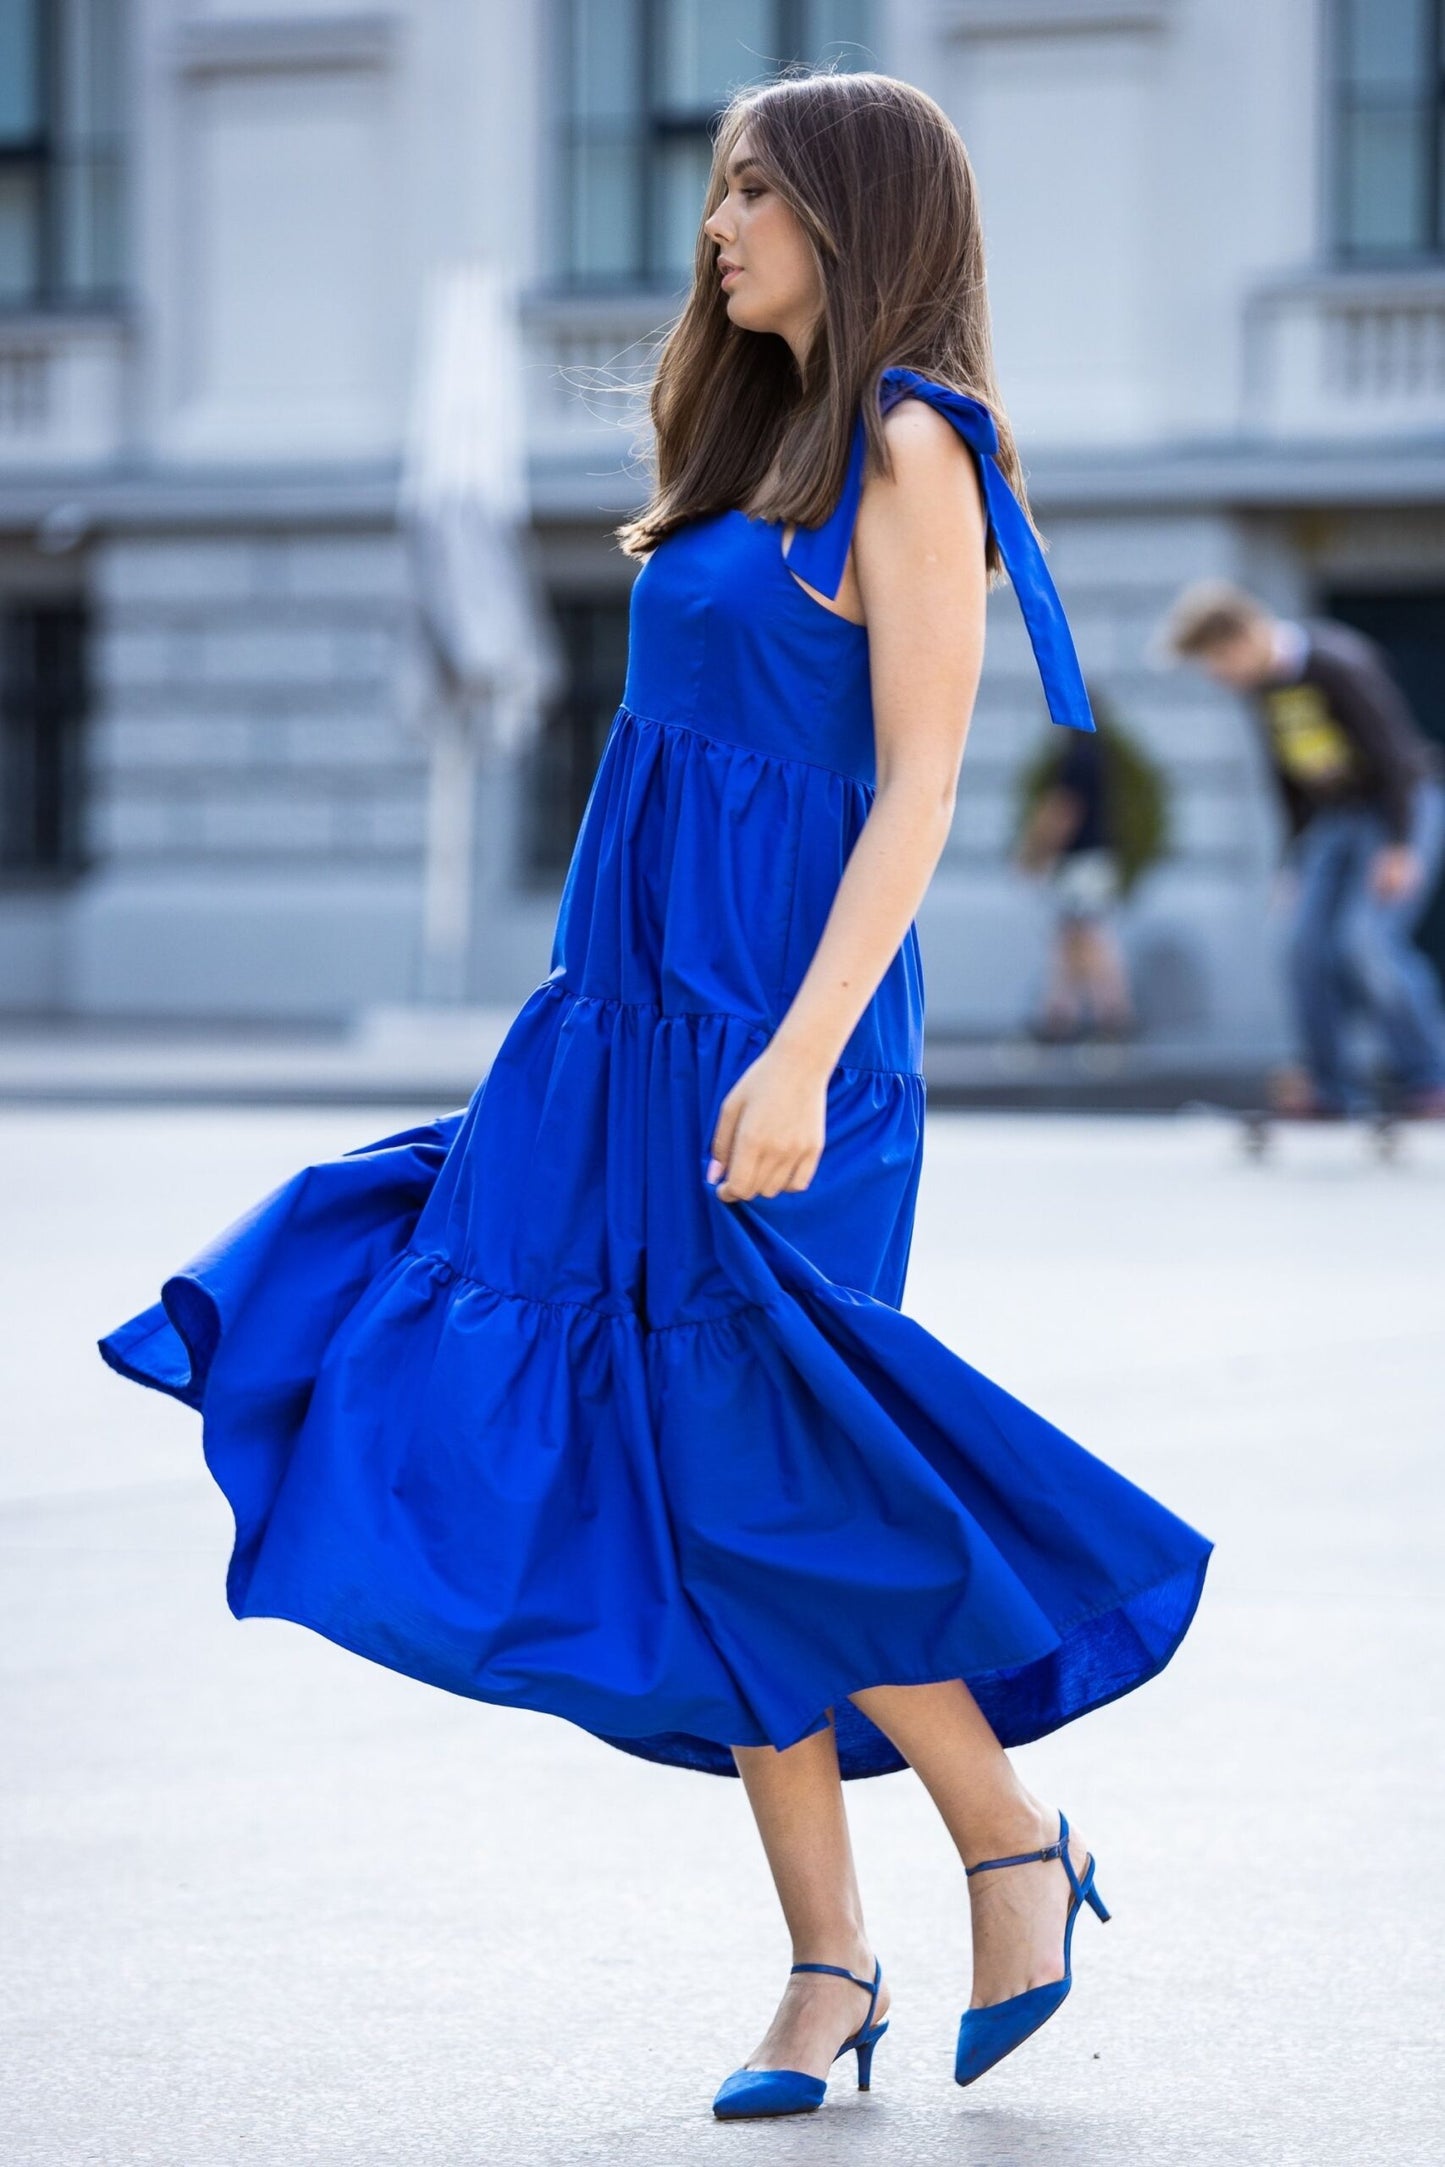 Blue cotton dress with bows